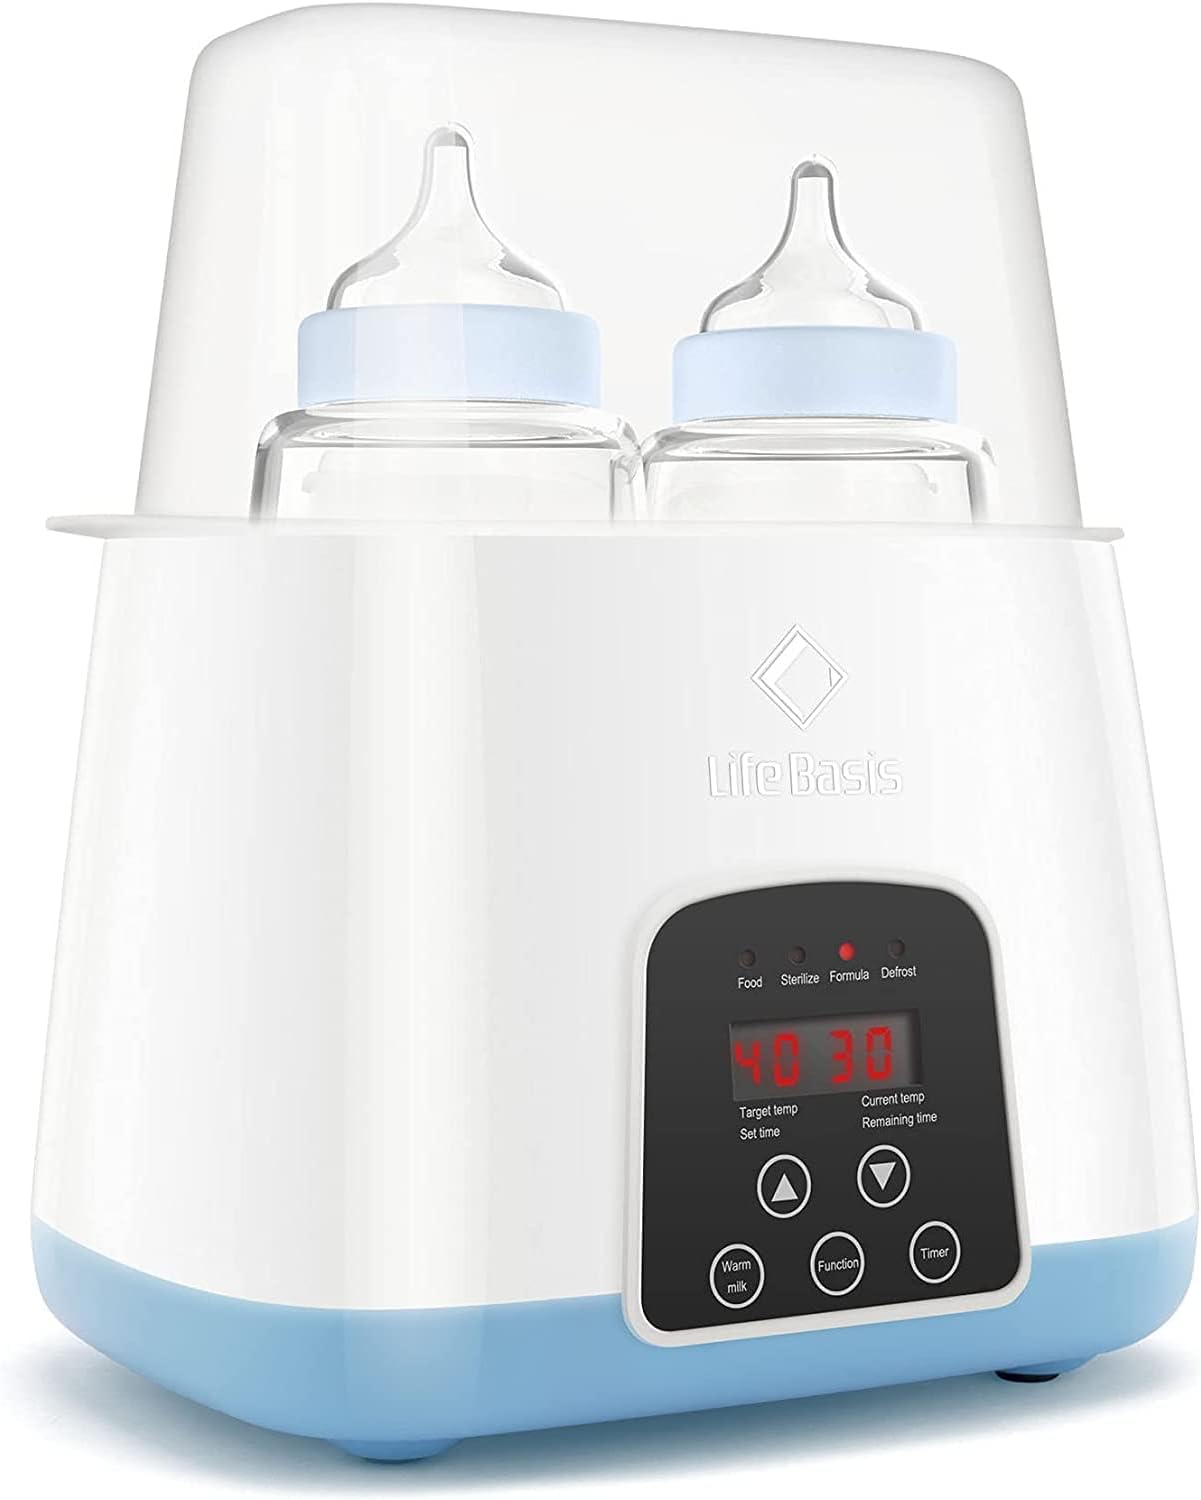 Life Basis Baby Bottle Warmer 6 in 1 Formula Milk Warmer with Timer, Accurate Temperature Control, with Defrost, Baby Food Heating, BPA-Free Milk Warmer and Baby Bottle-Feeding Supplies, Fits 2 Bottles